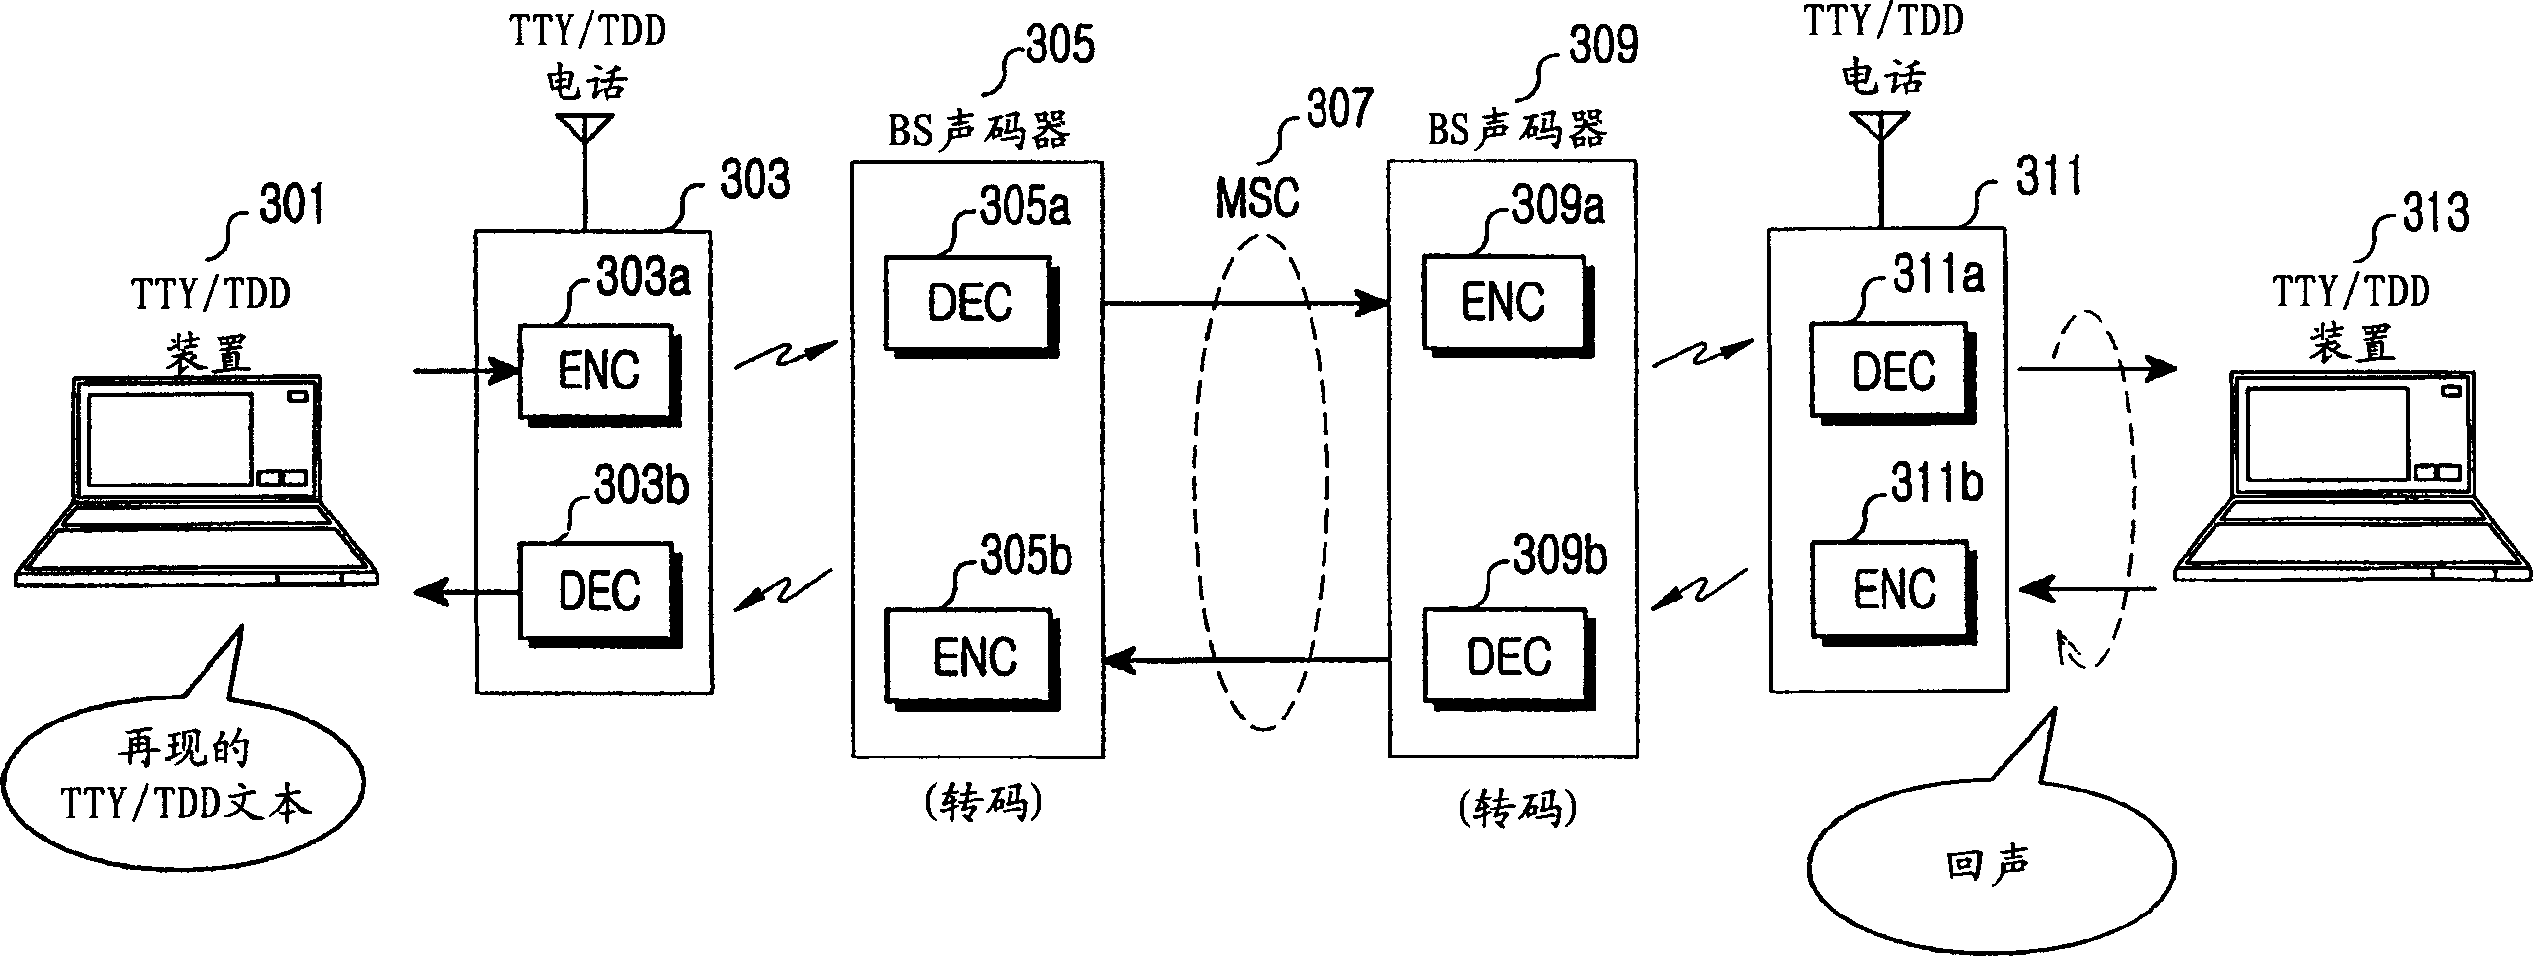 Method and apparatus for acoustic ECHO cancellation in a communication system providing TTY/TDD service